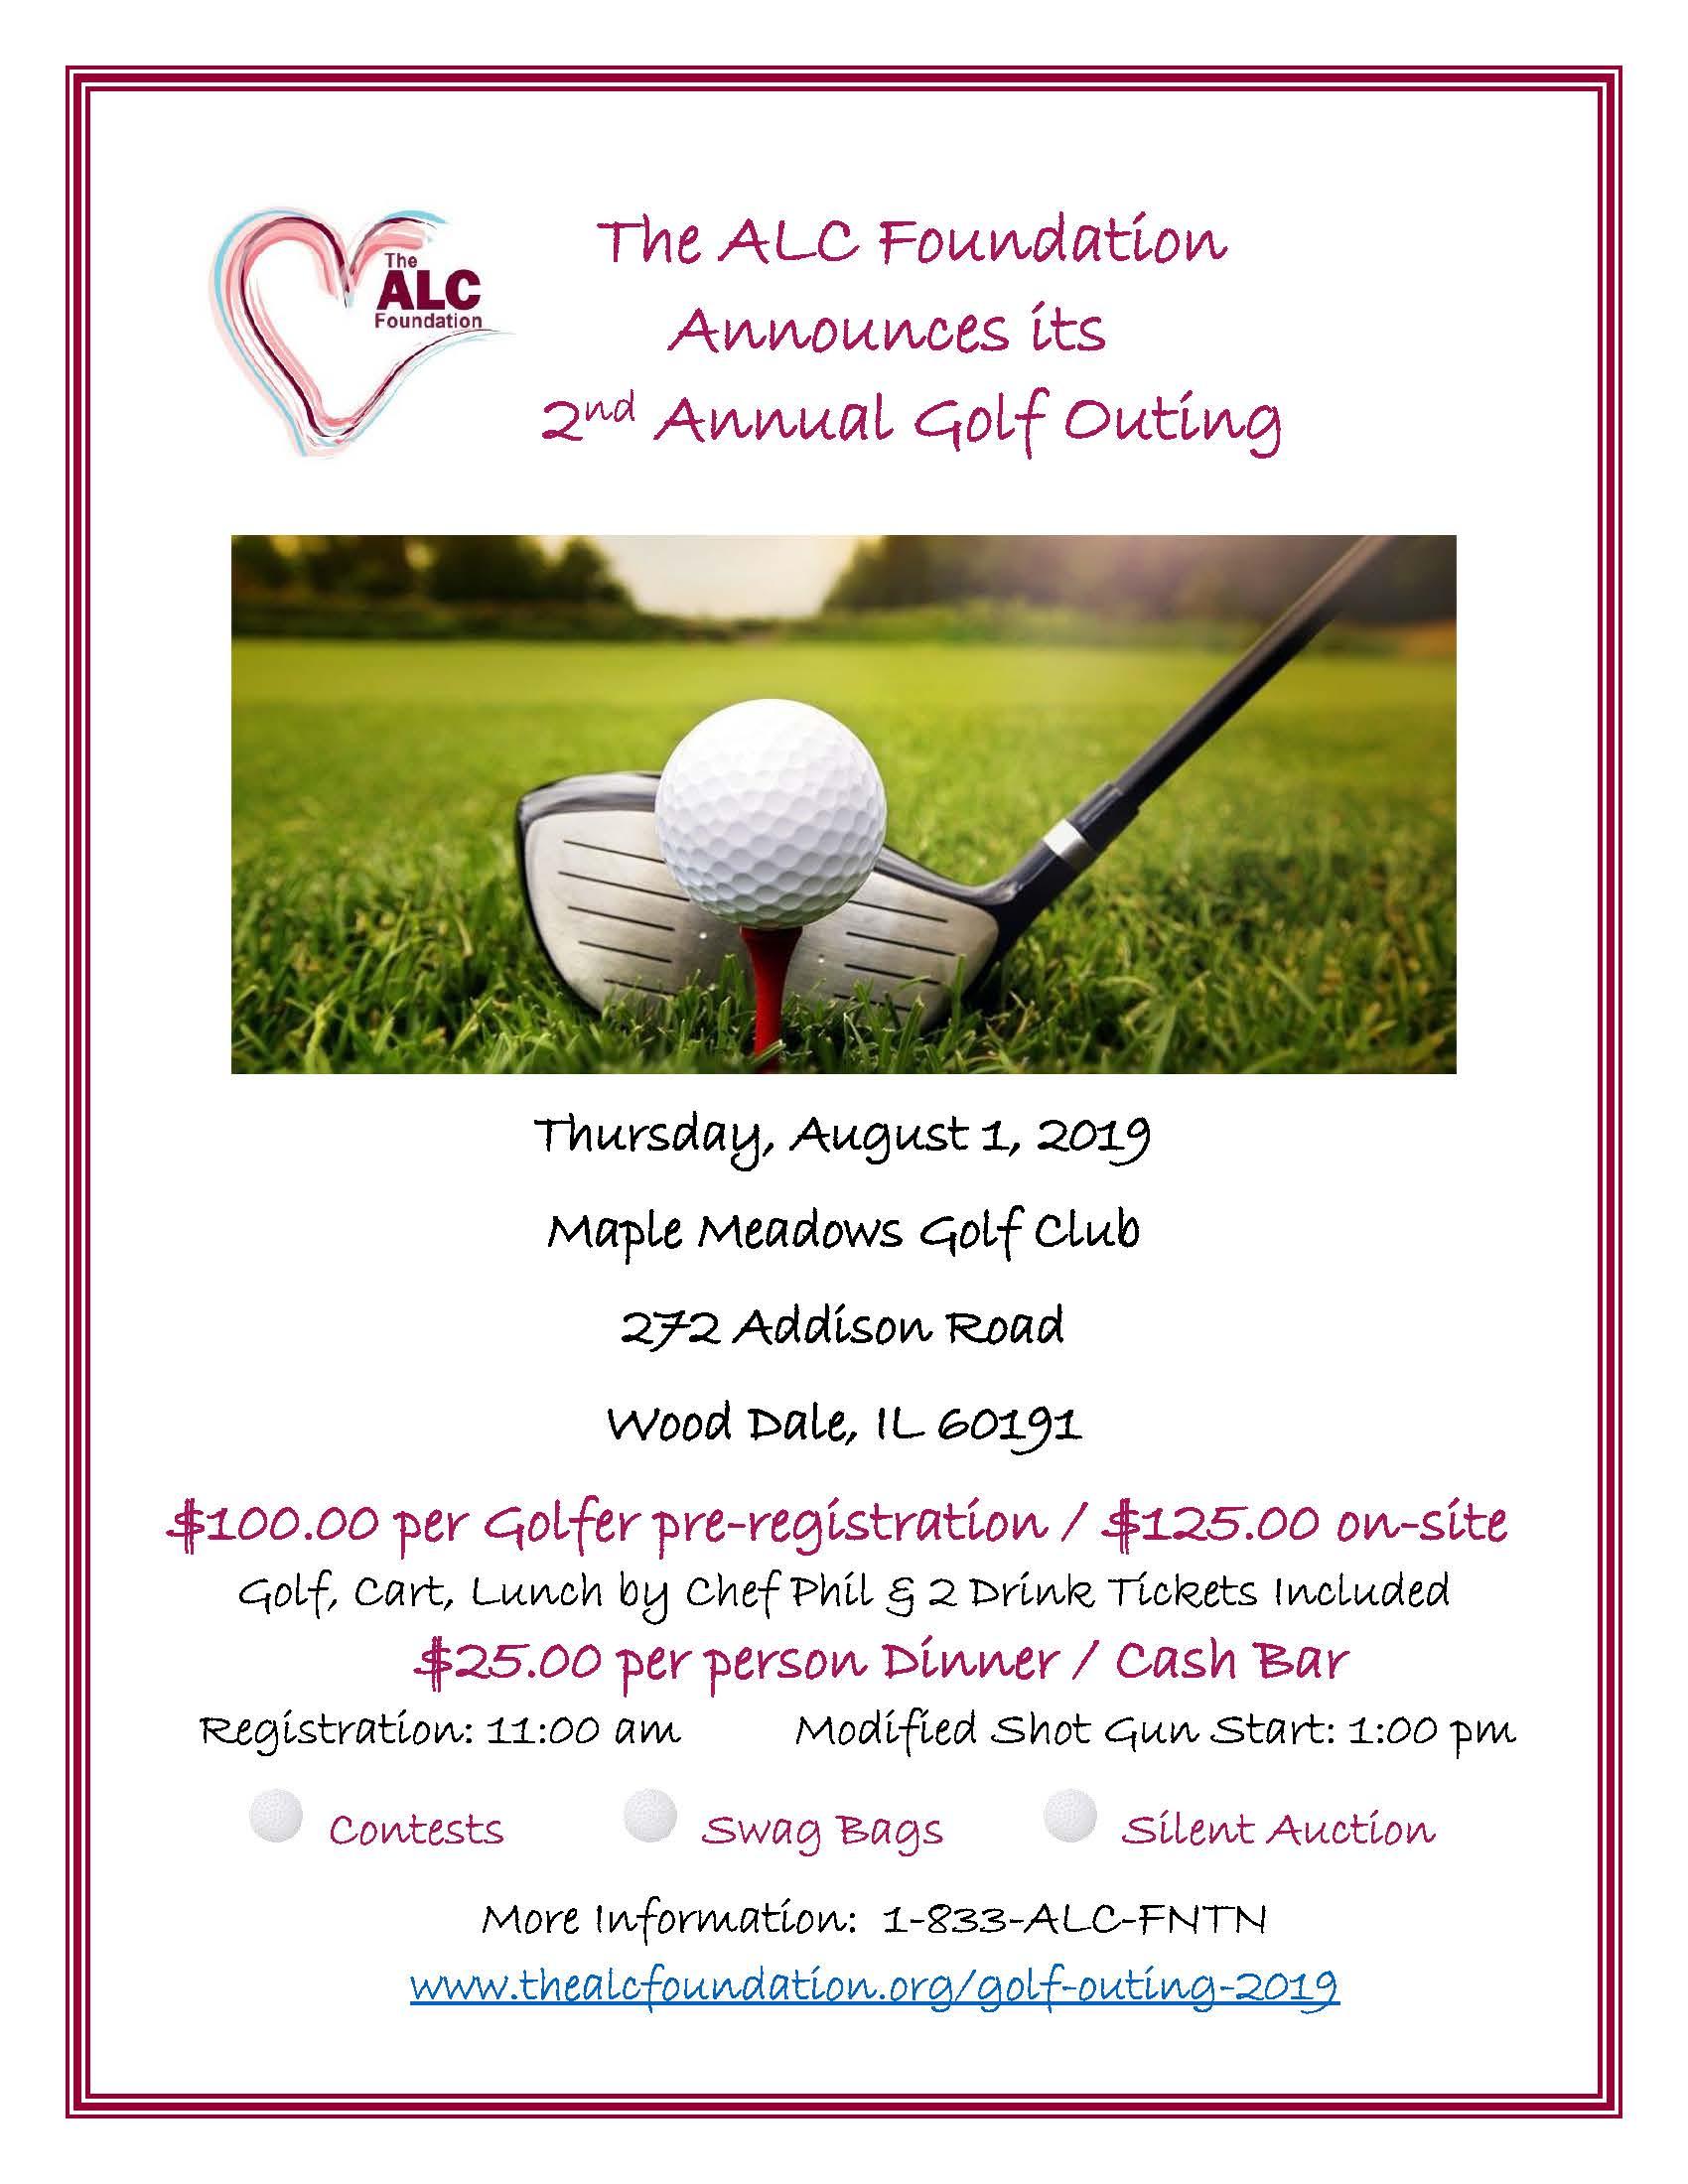 The ALC Foundation 2019 Golf Outing to Support Those in Need